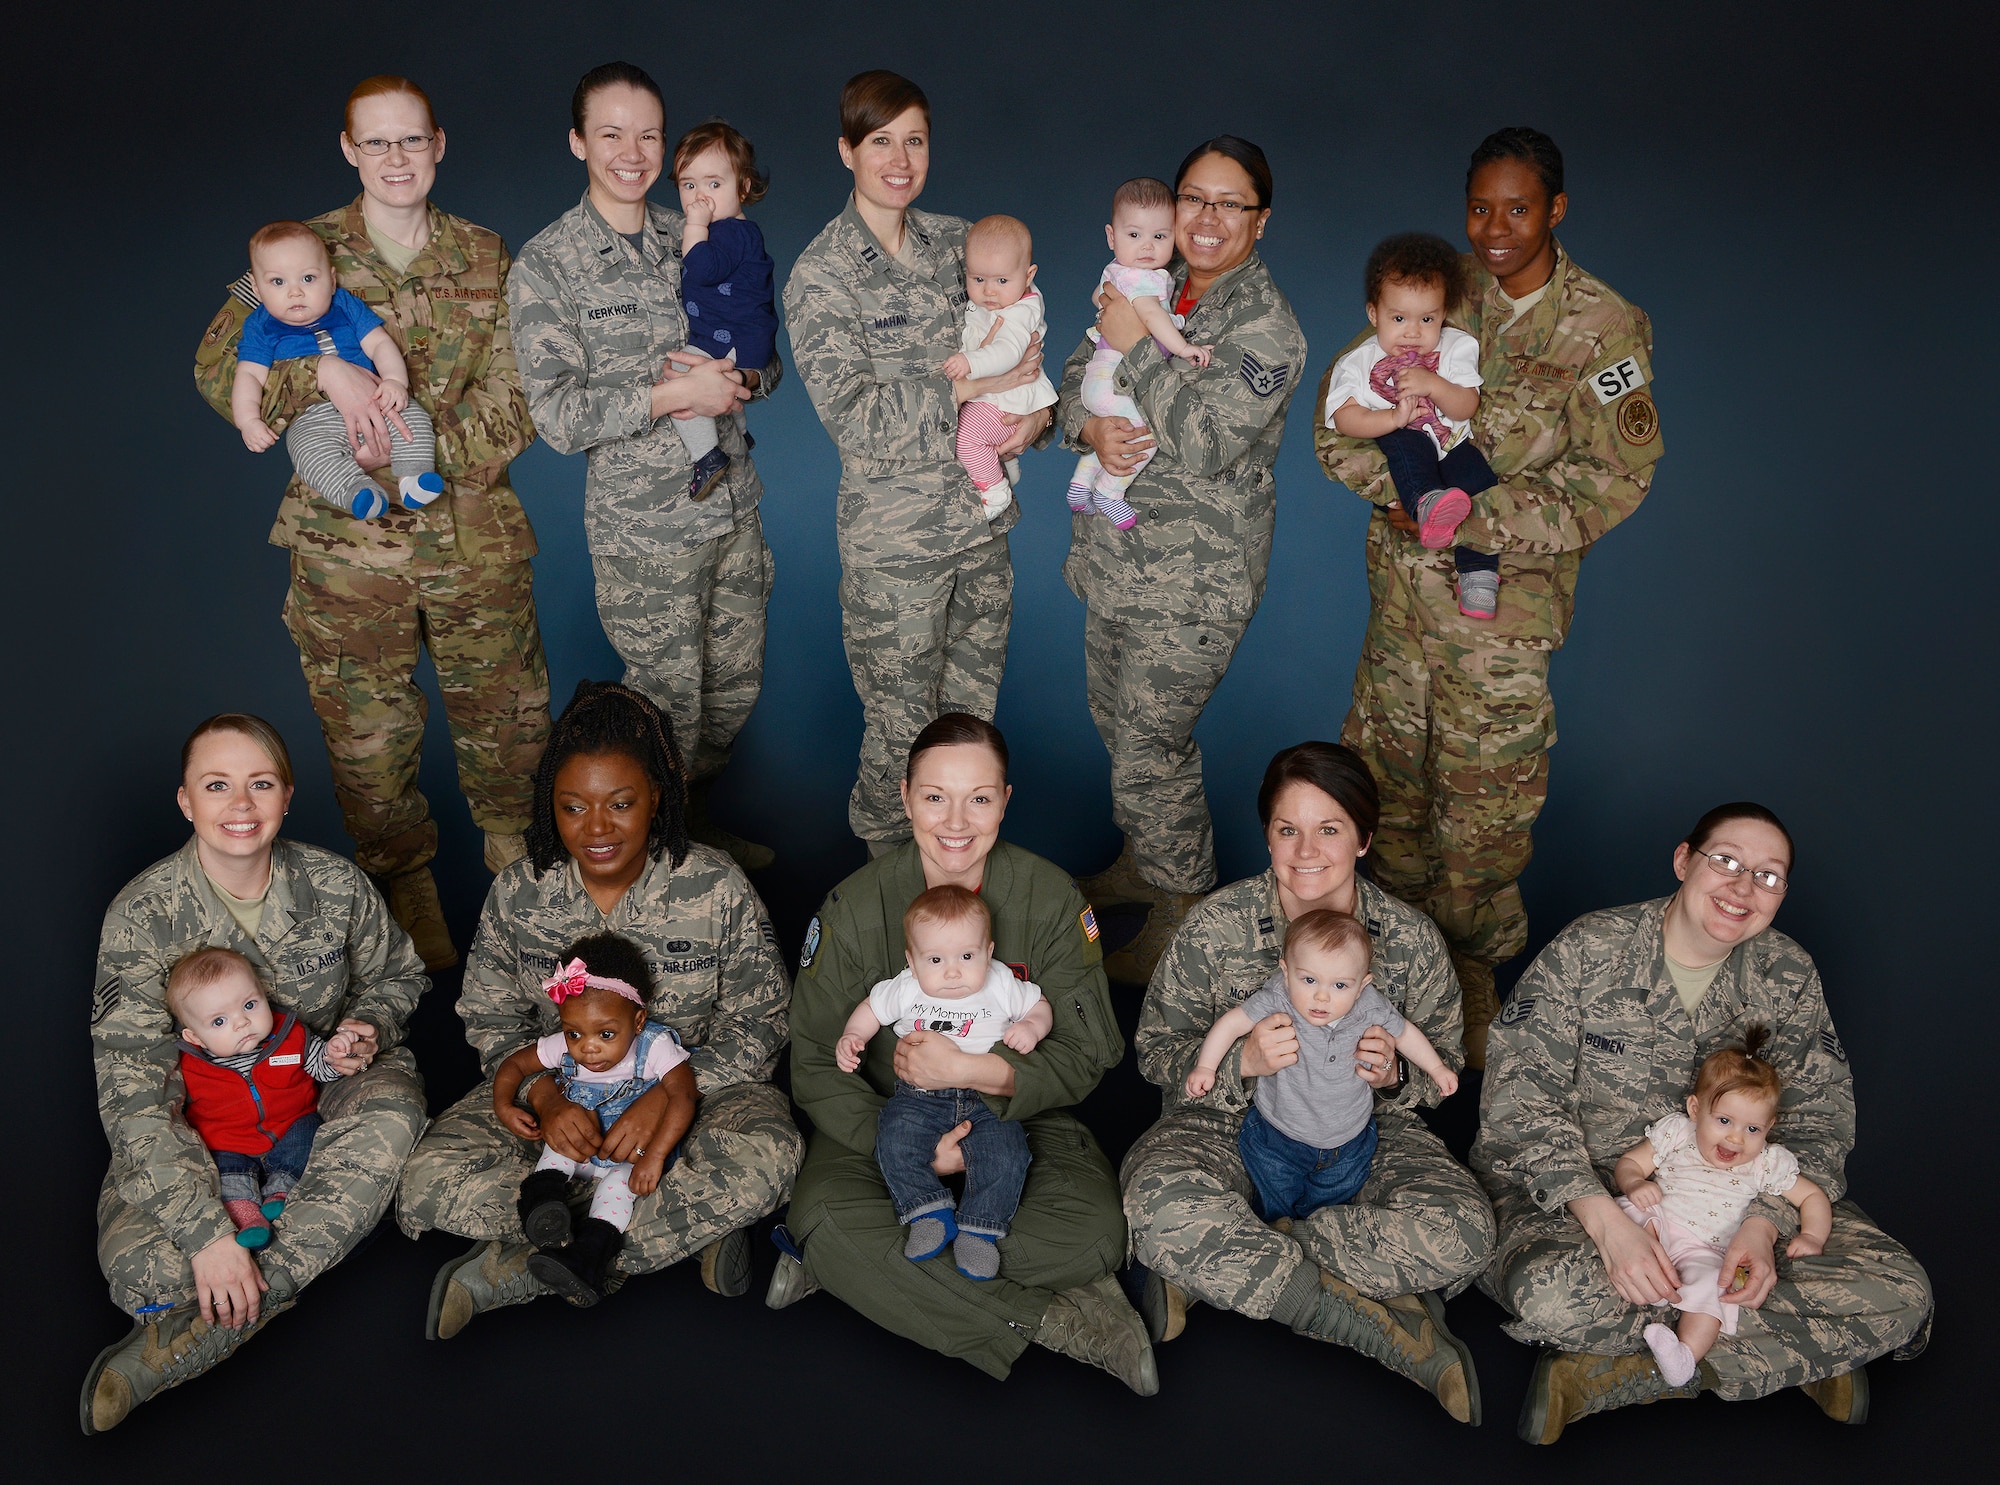 A group of 10 mothers represent a portion of women serving in the U.S. Air Force while breast-feeding their child. August is recognized as National Breast-feeding Month. (U.S. Air Force photo by Beau Wade)